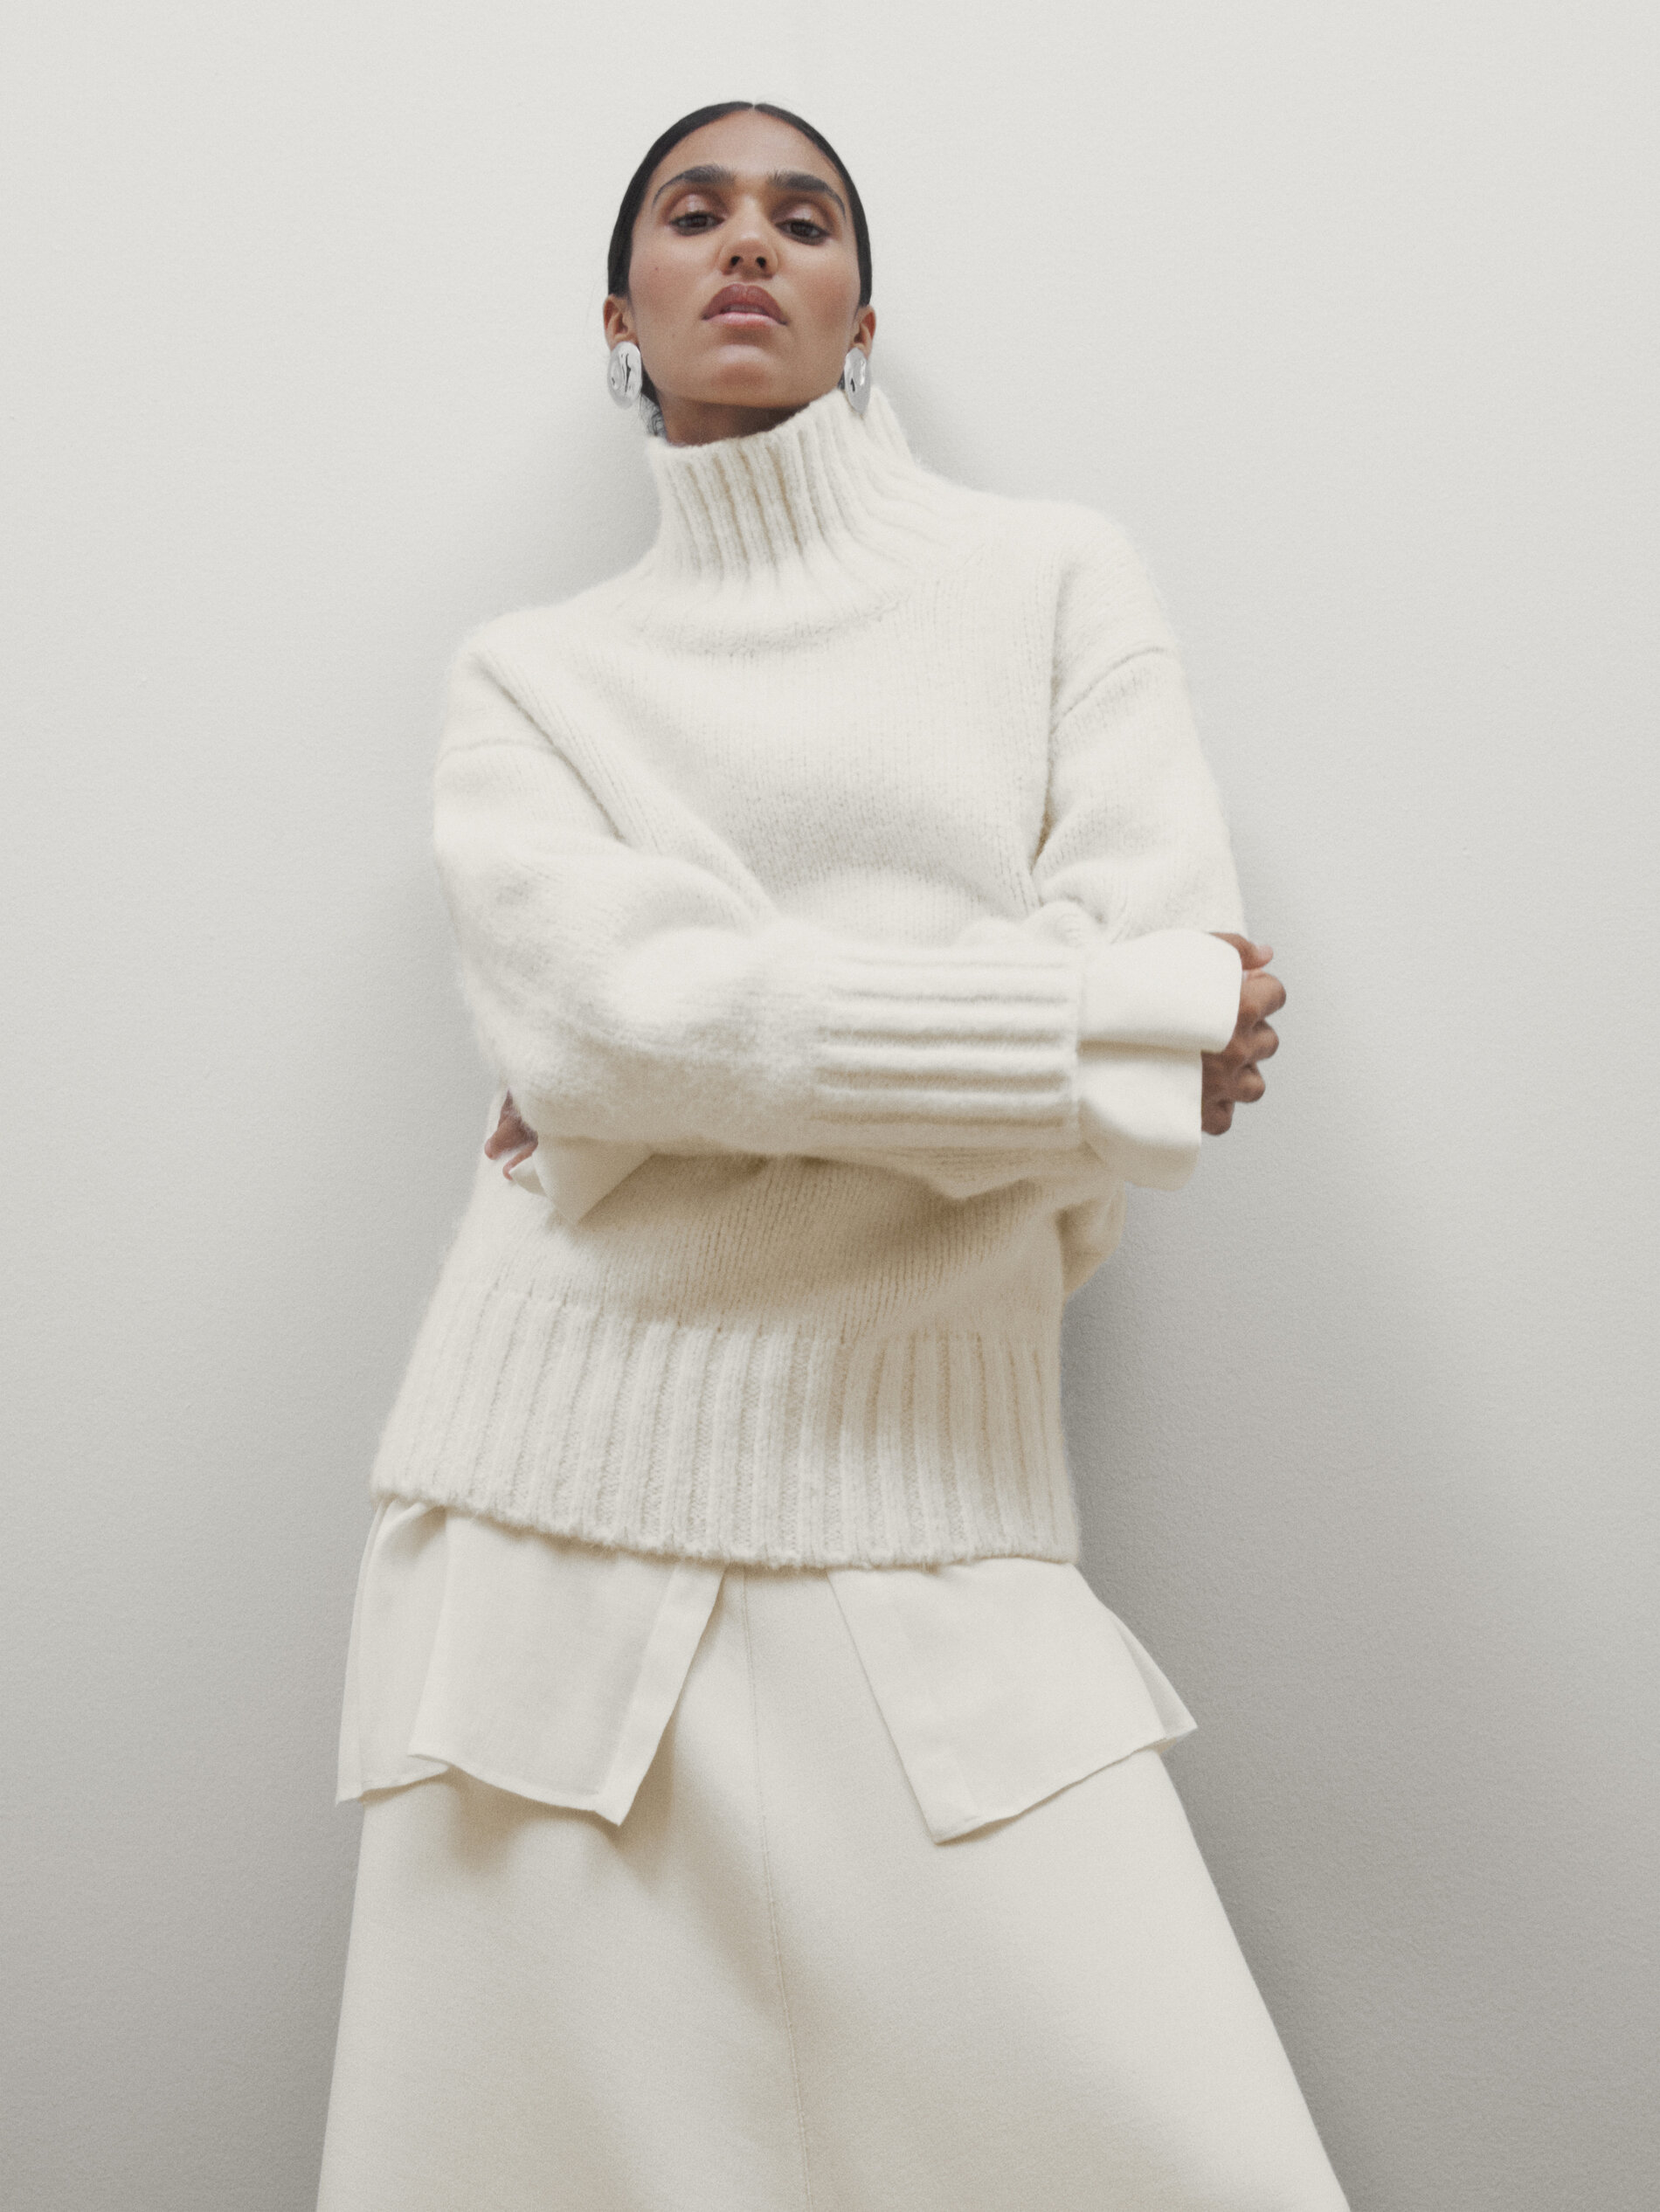 Knit high neck sweater - Limited Edition · Cream, Black · Sweaters